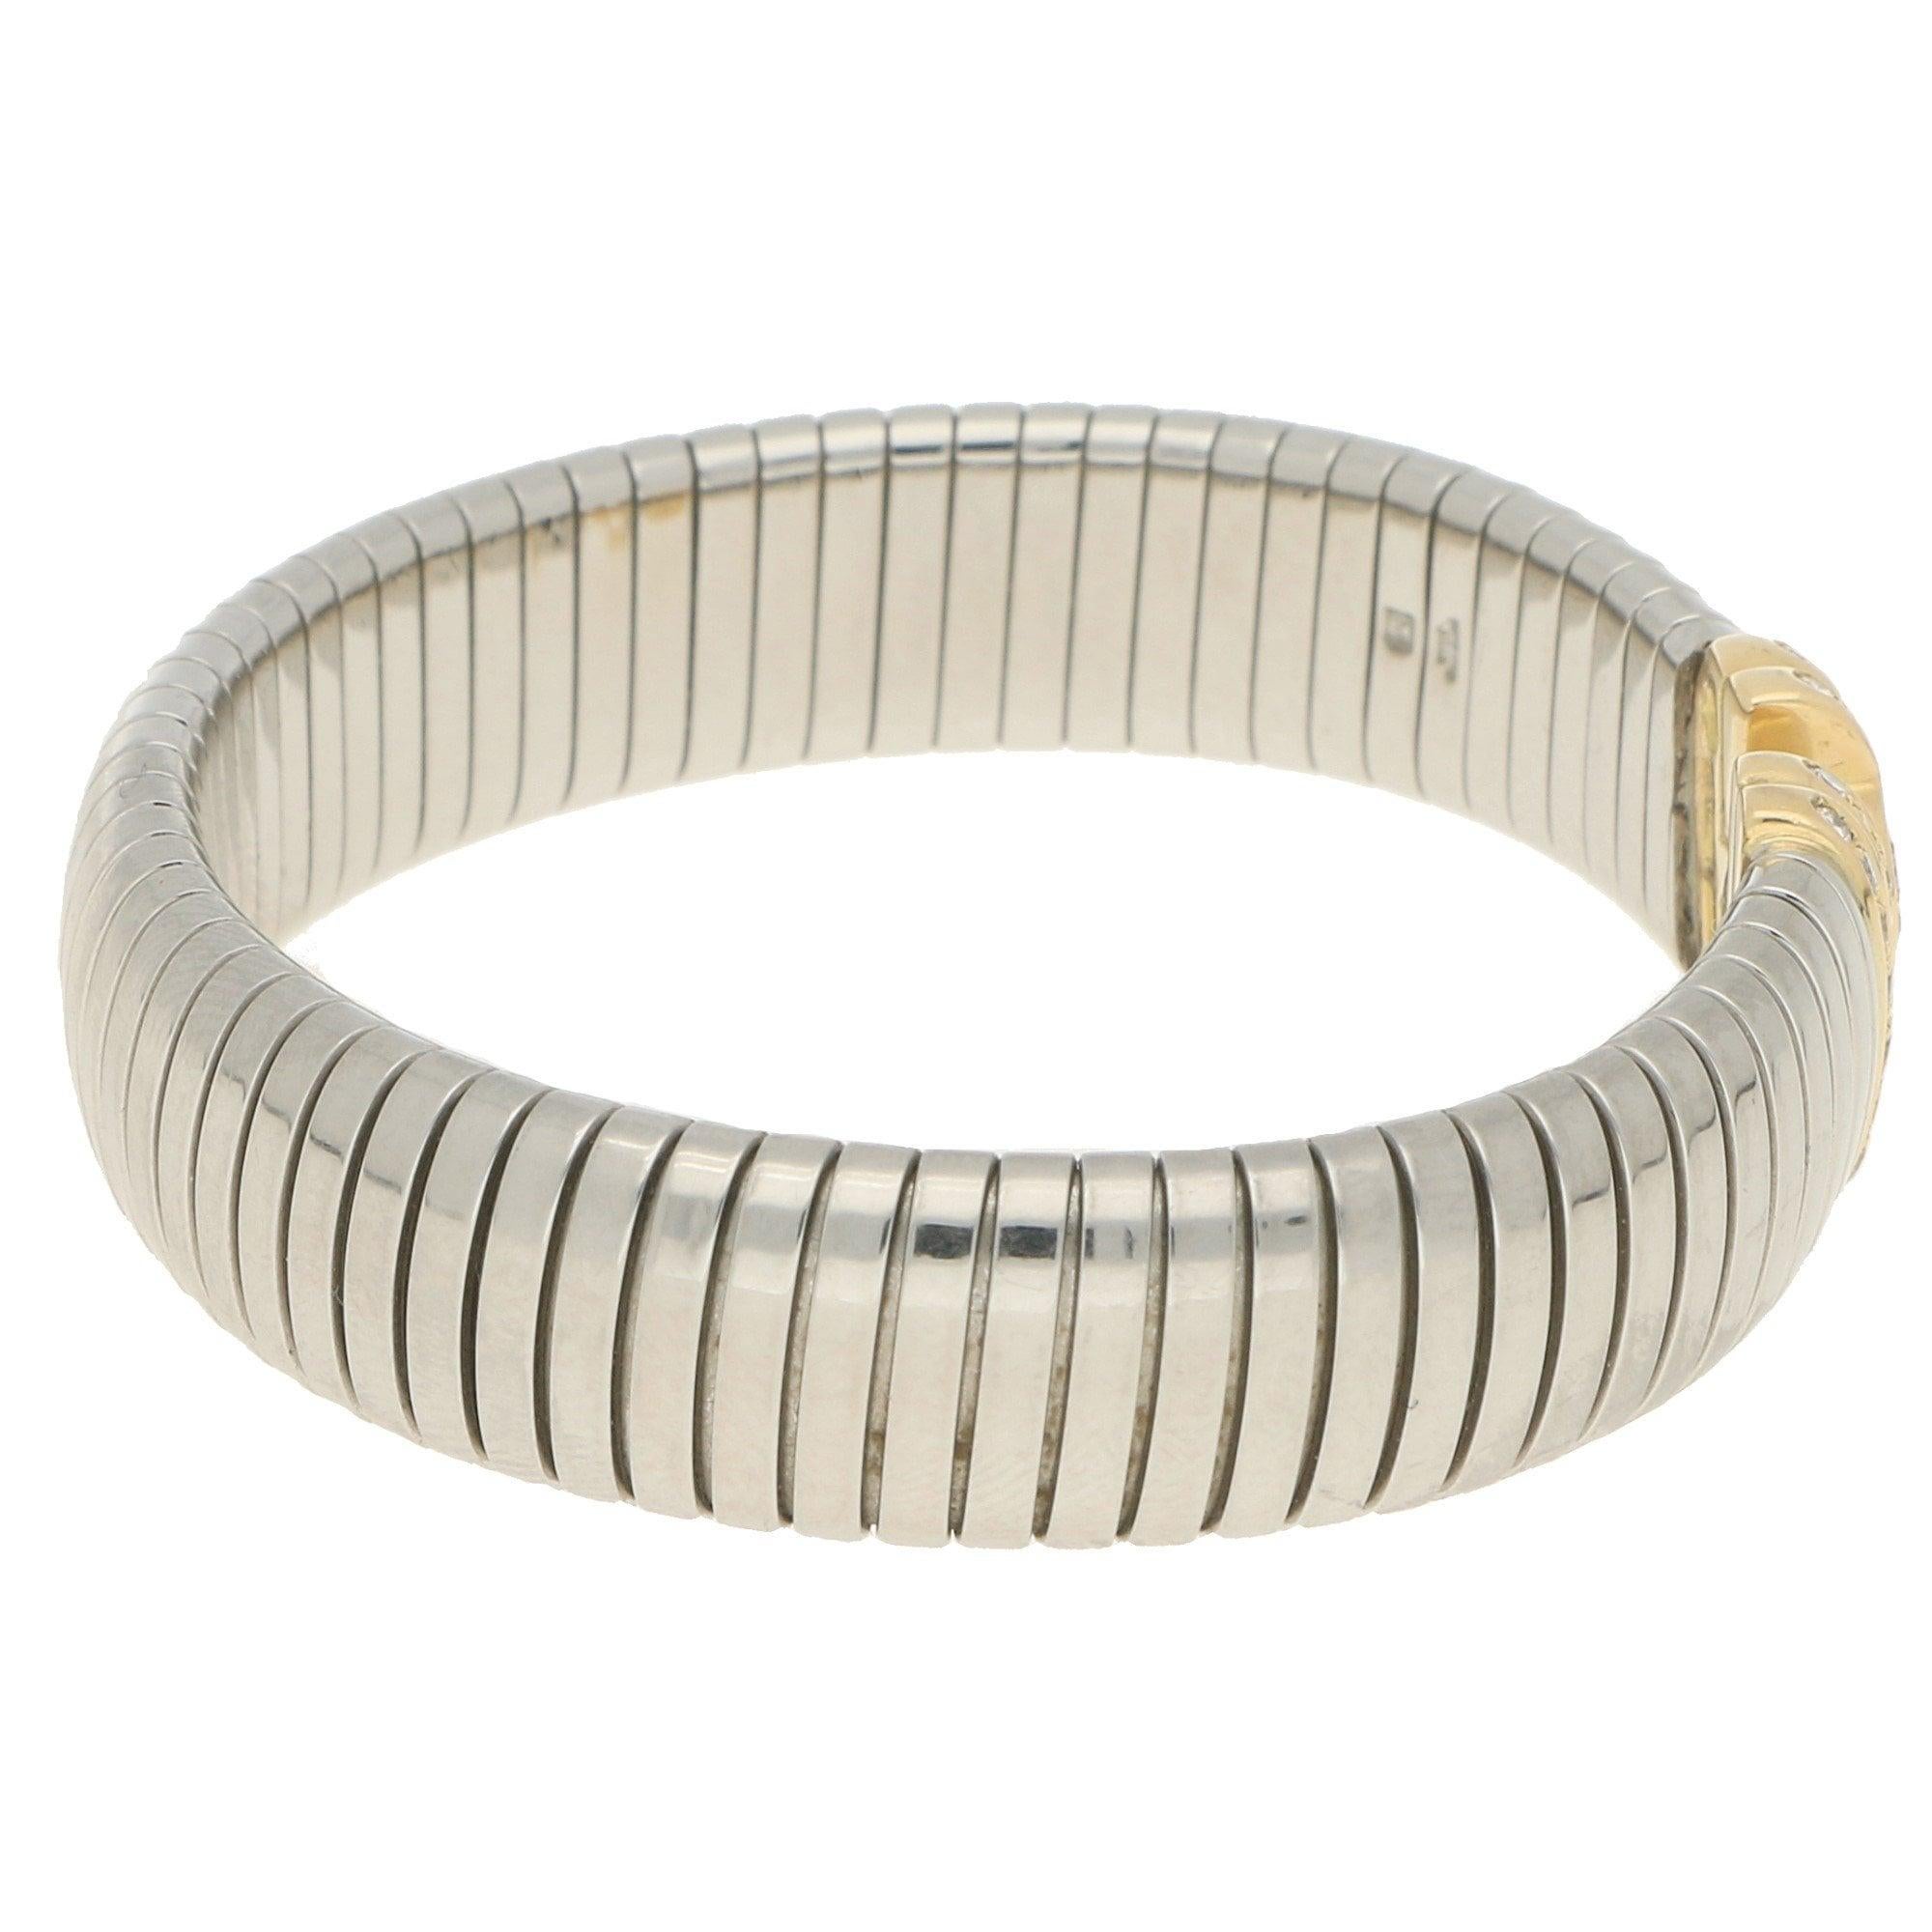 A vintage Bvlgari Parentesi diamond bangle bracelet in 18-karat yellow gold and stainless steel. From the brand's Parentesi collection, the bracelet is designed as a springy flat snake-link stainless steel bangle with Tubogas inspiration, leading to